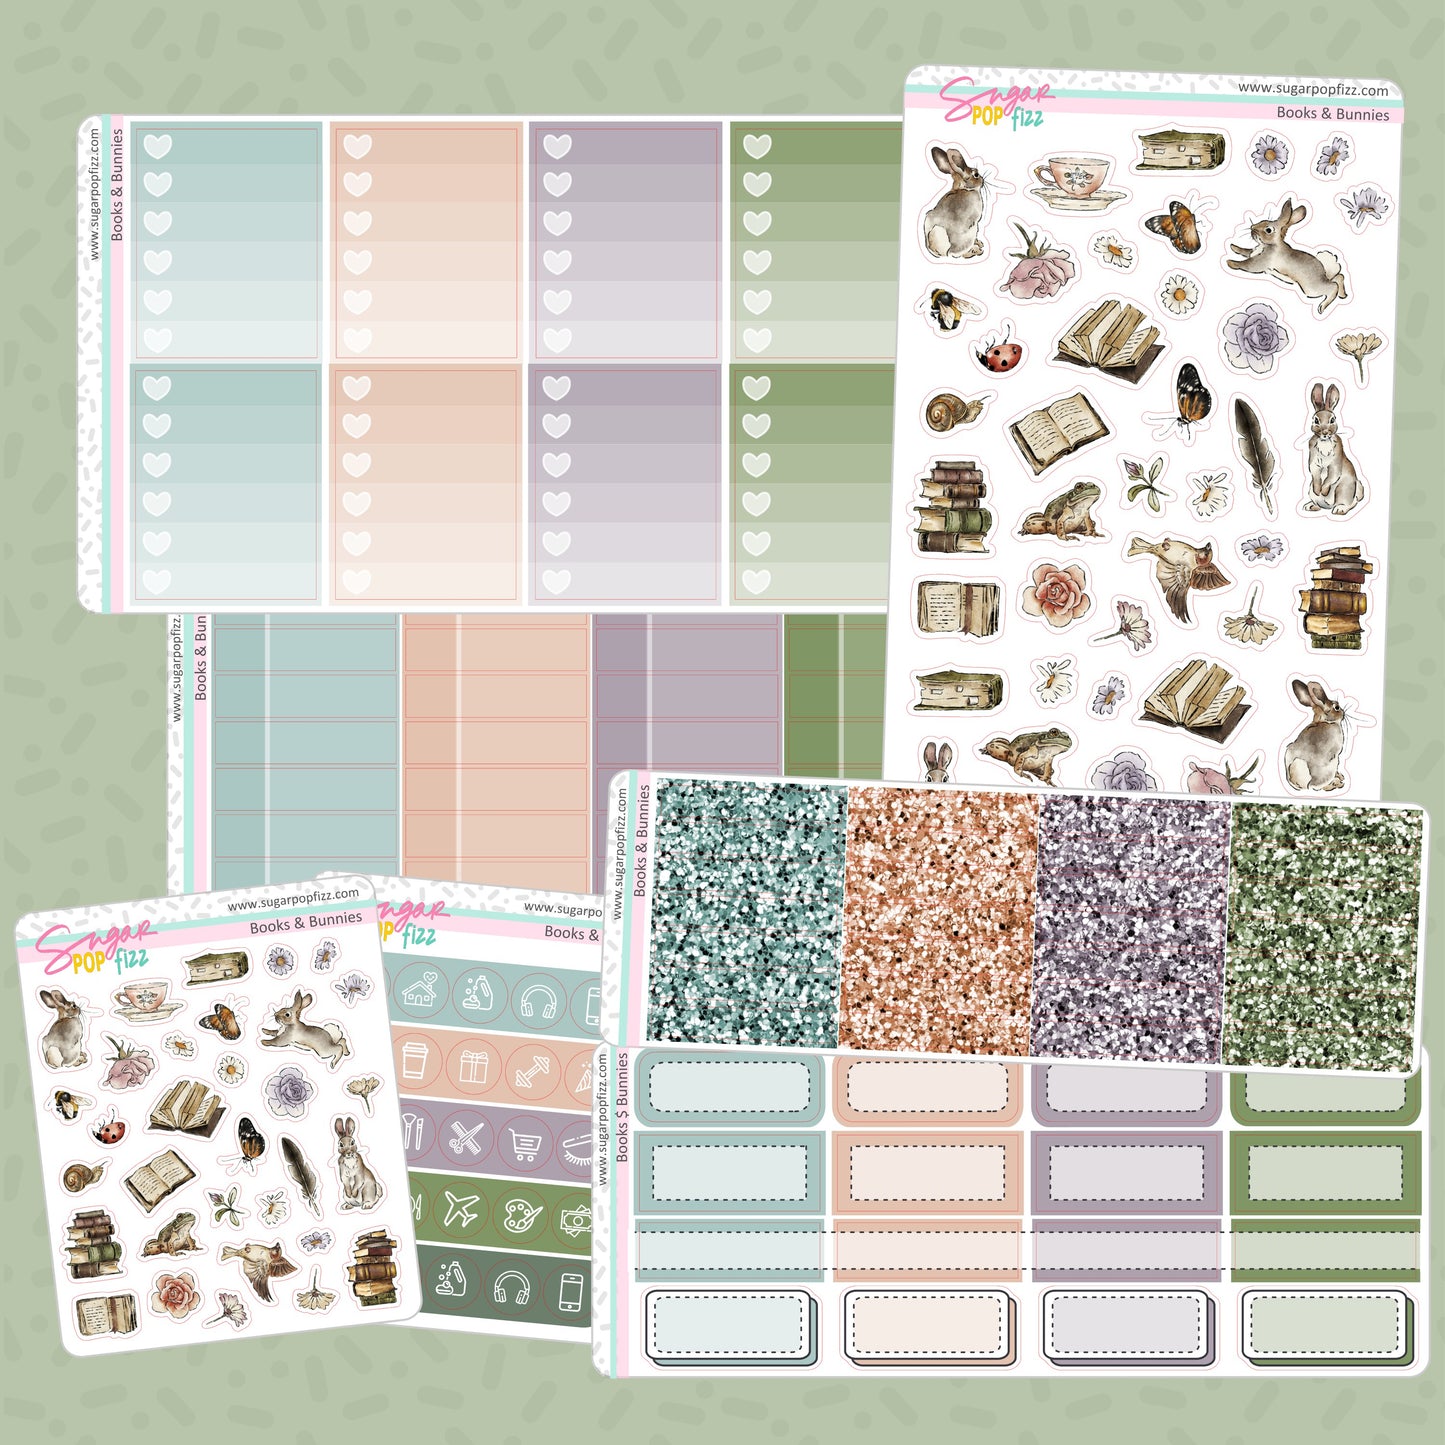 Books & Bunnies Weekly Kit Add-ons - updated 2023